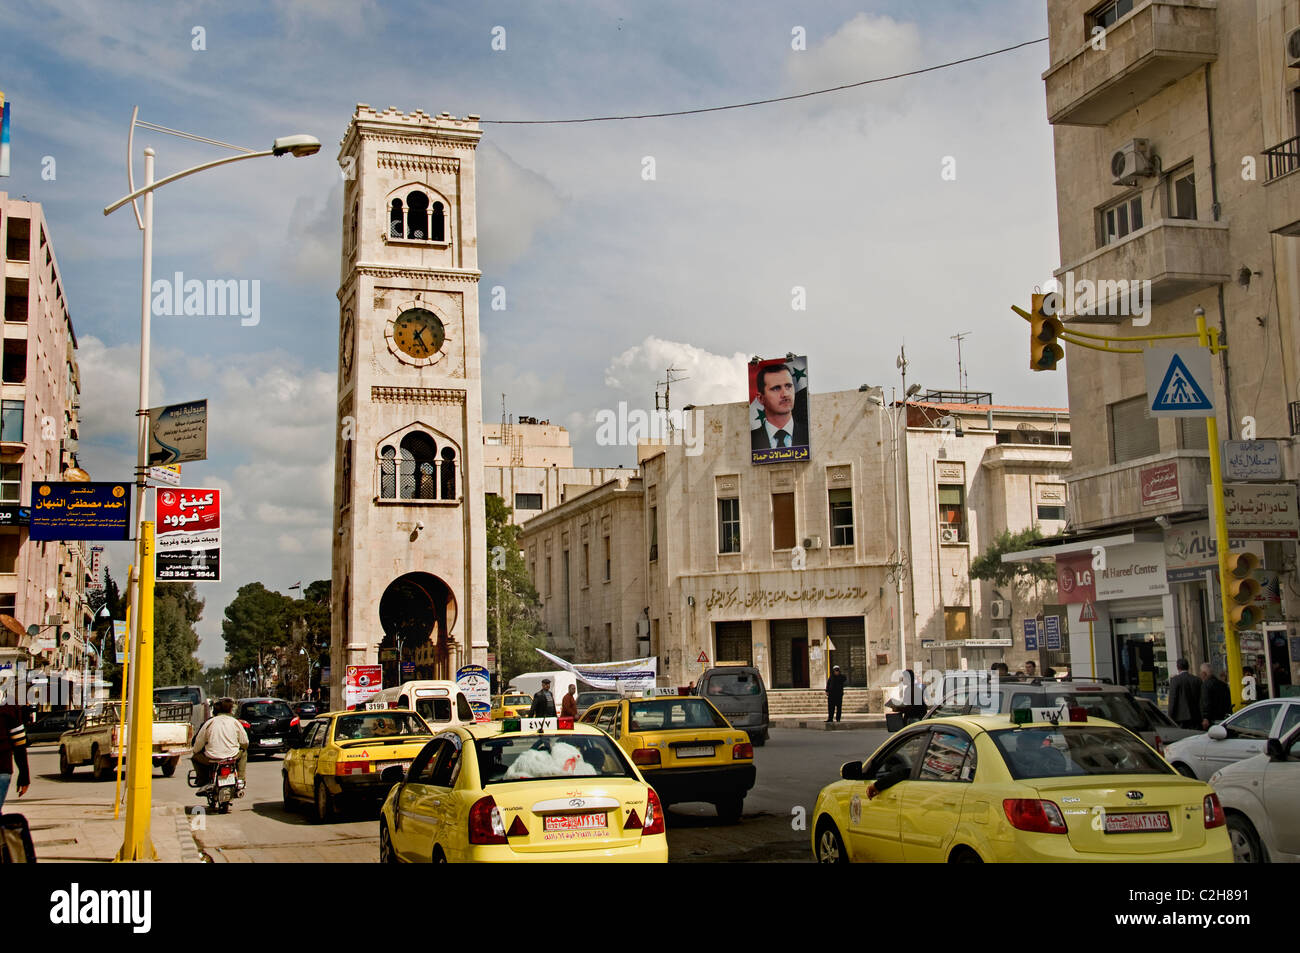 Hama Syria clock tower old city town center taxi Stock Photo